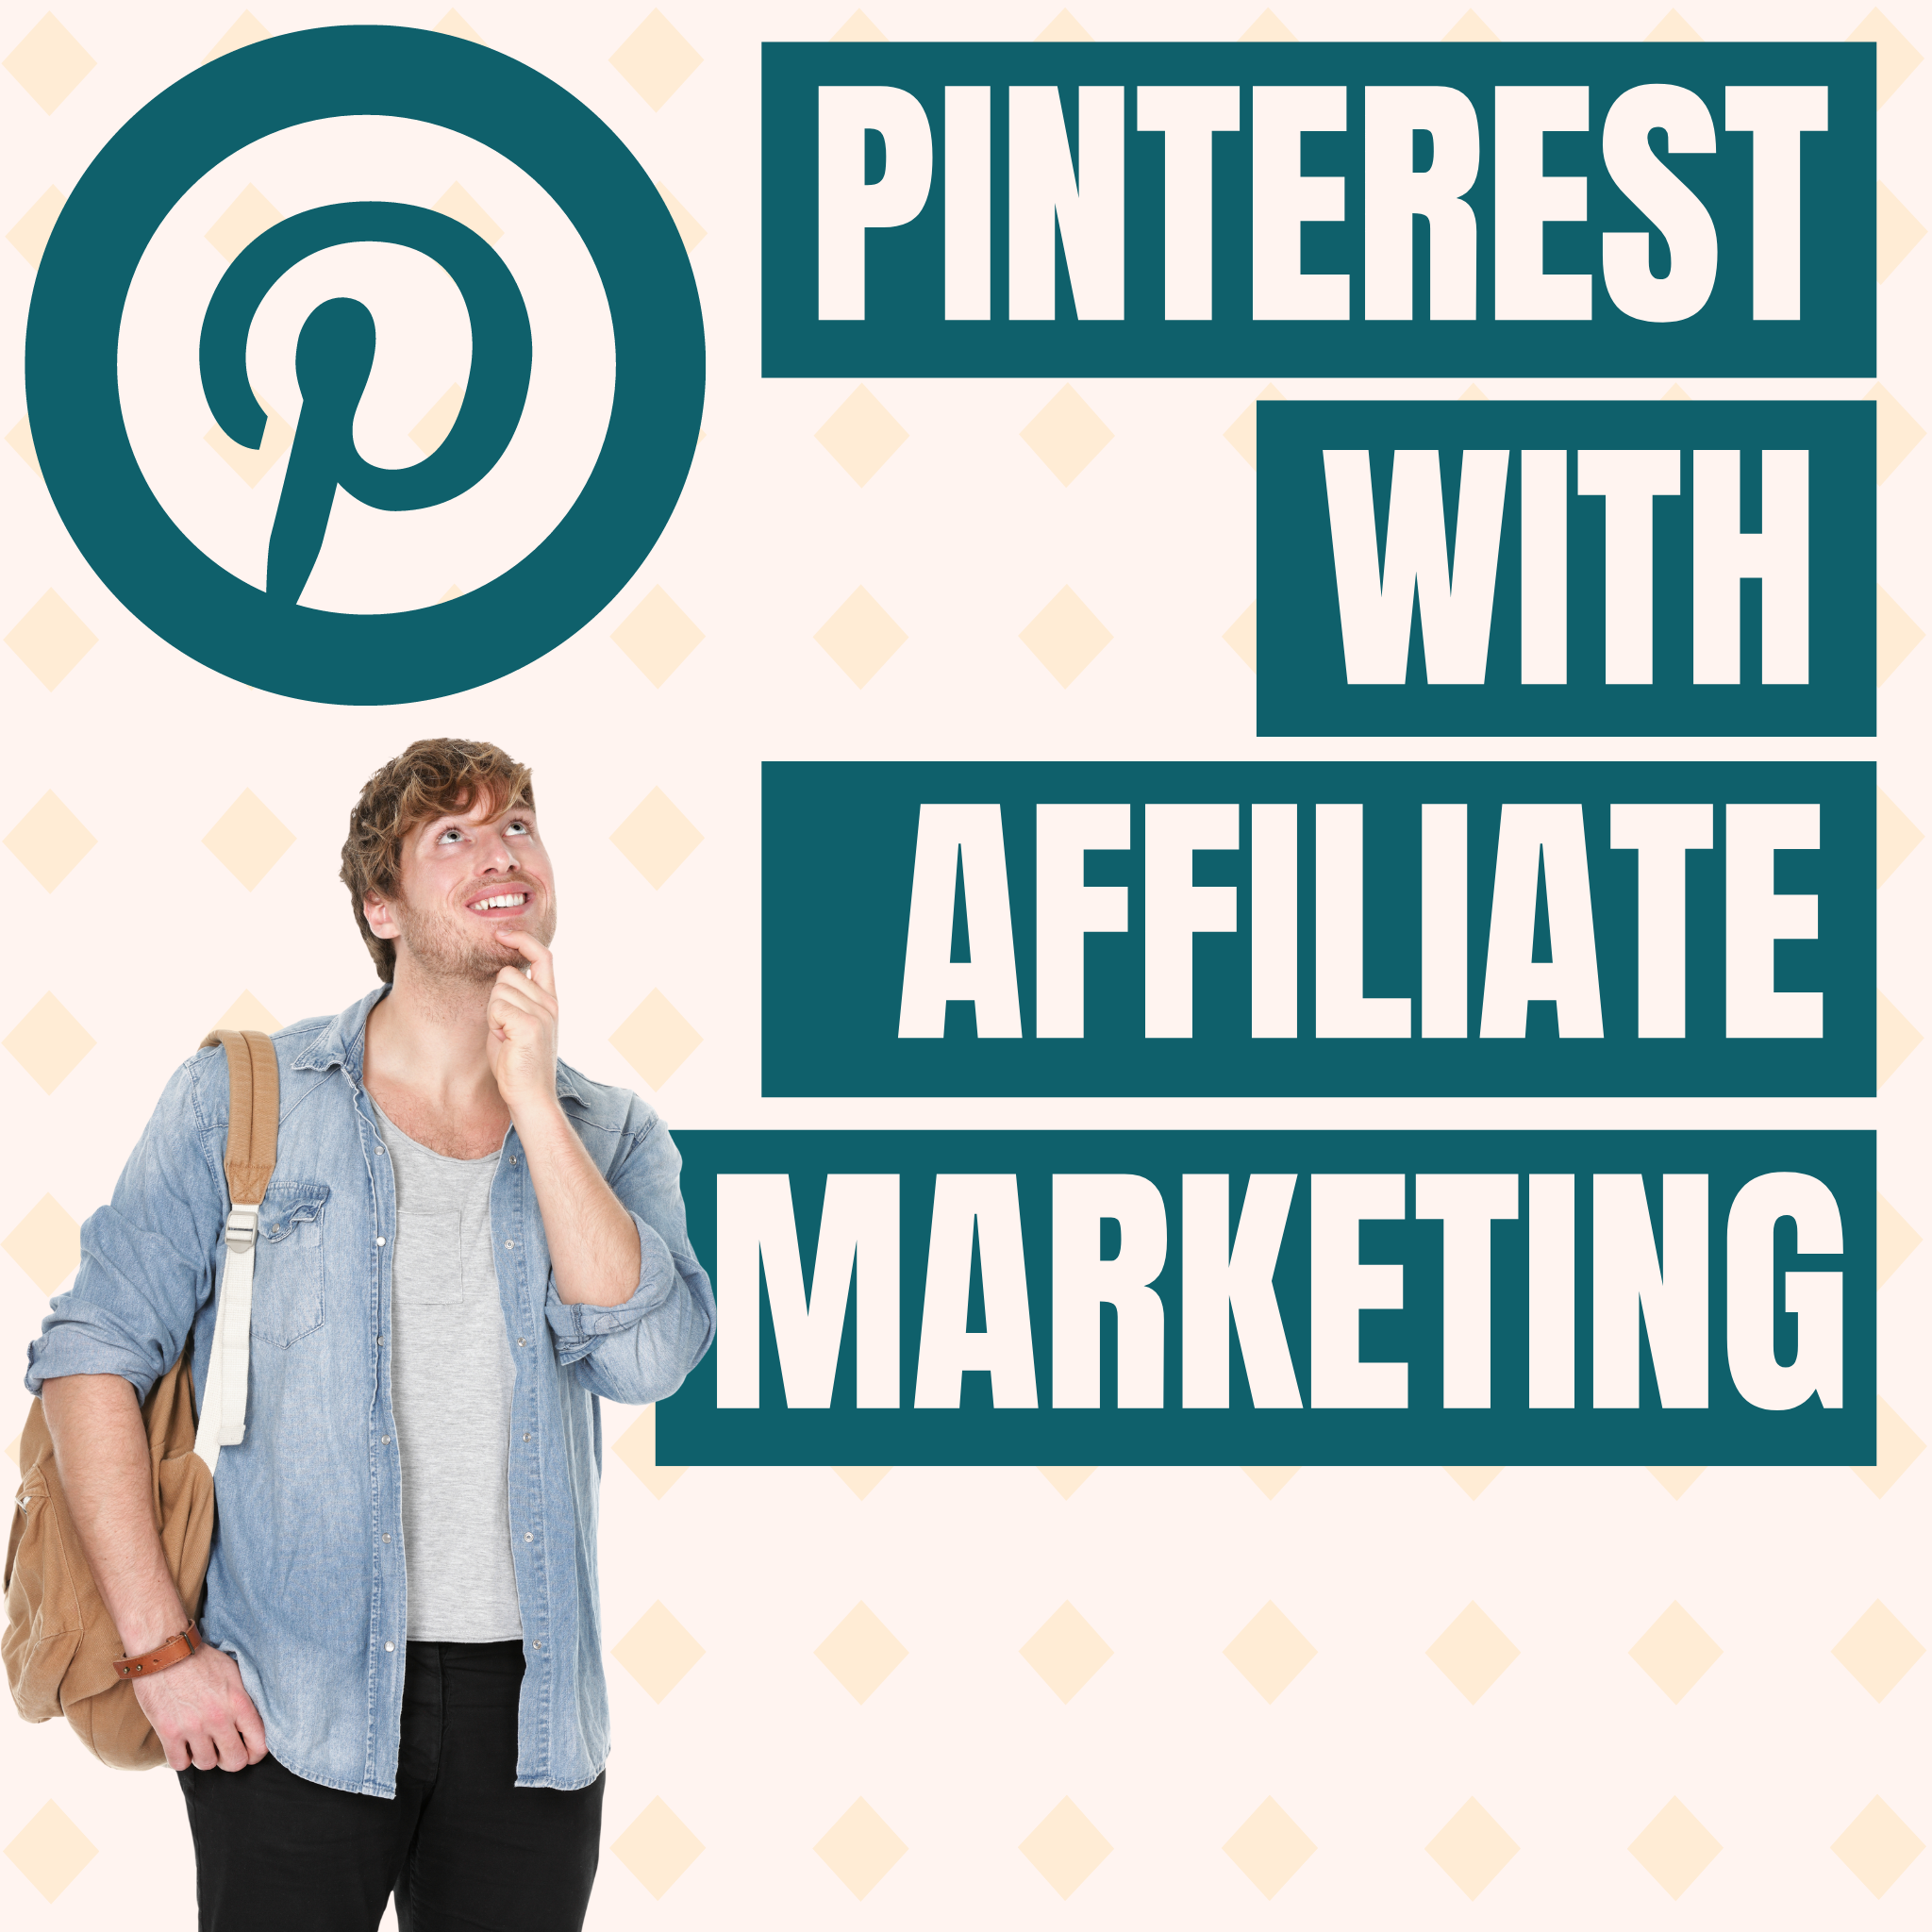 The amazing power of Pinterest with affiliate marketing: 6 things to consider